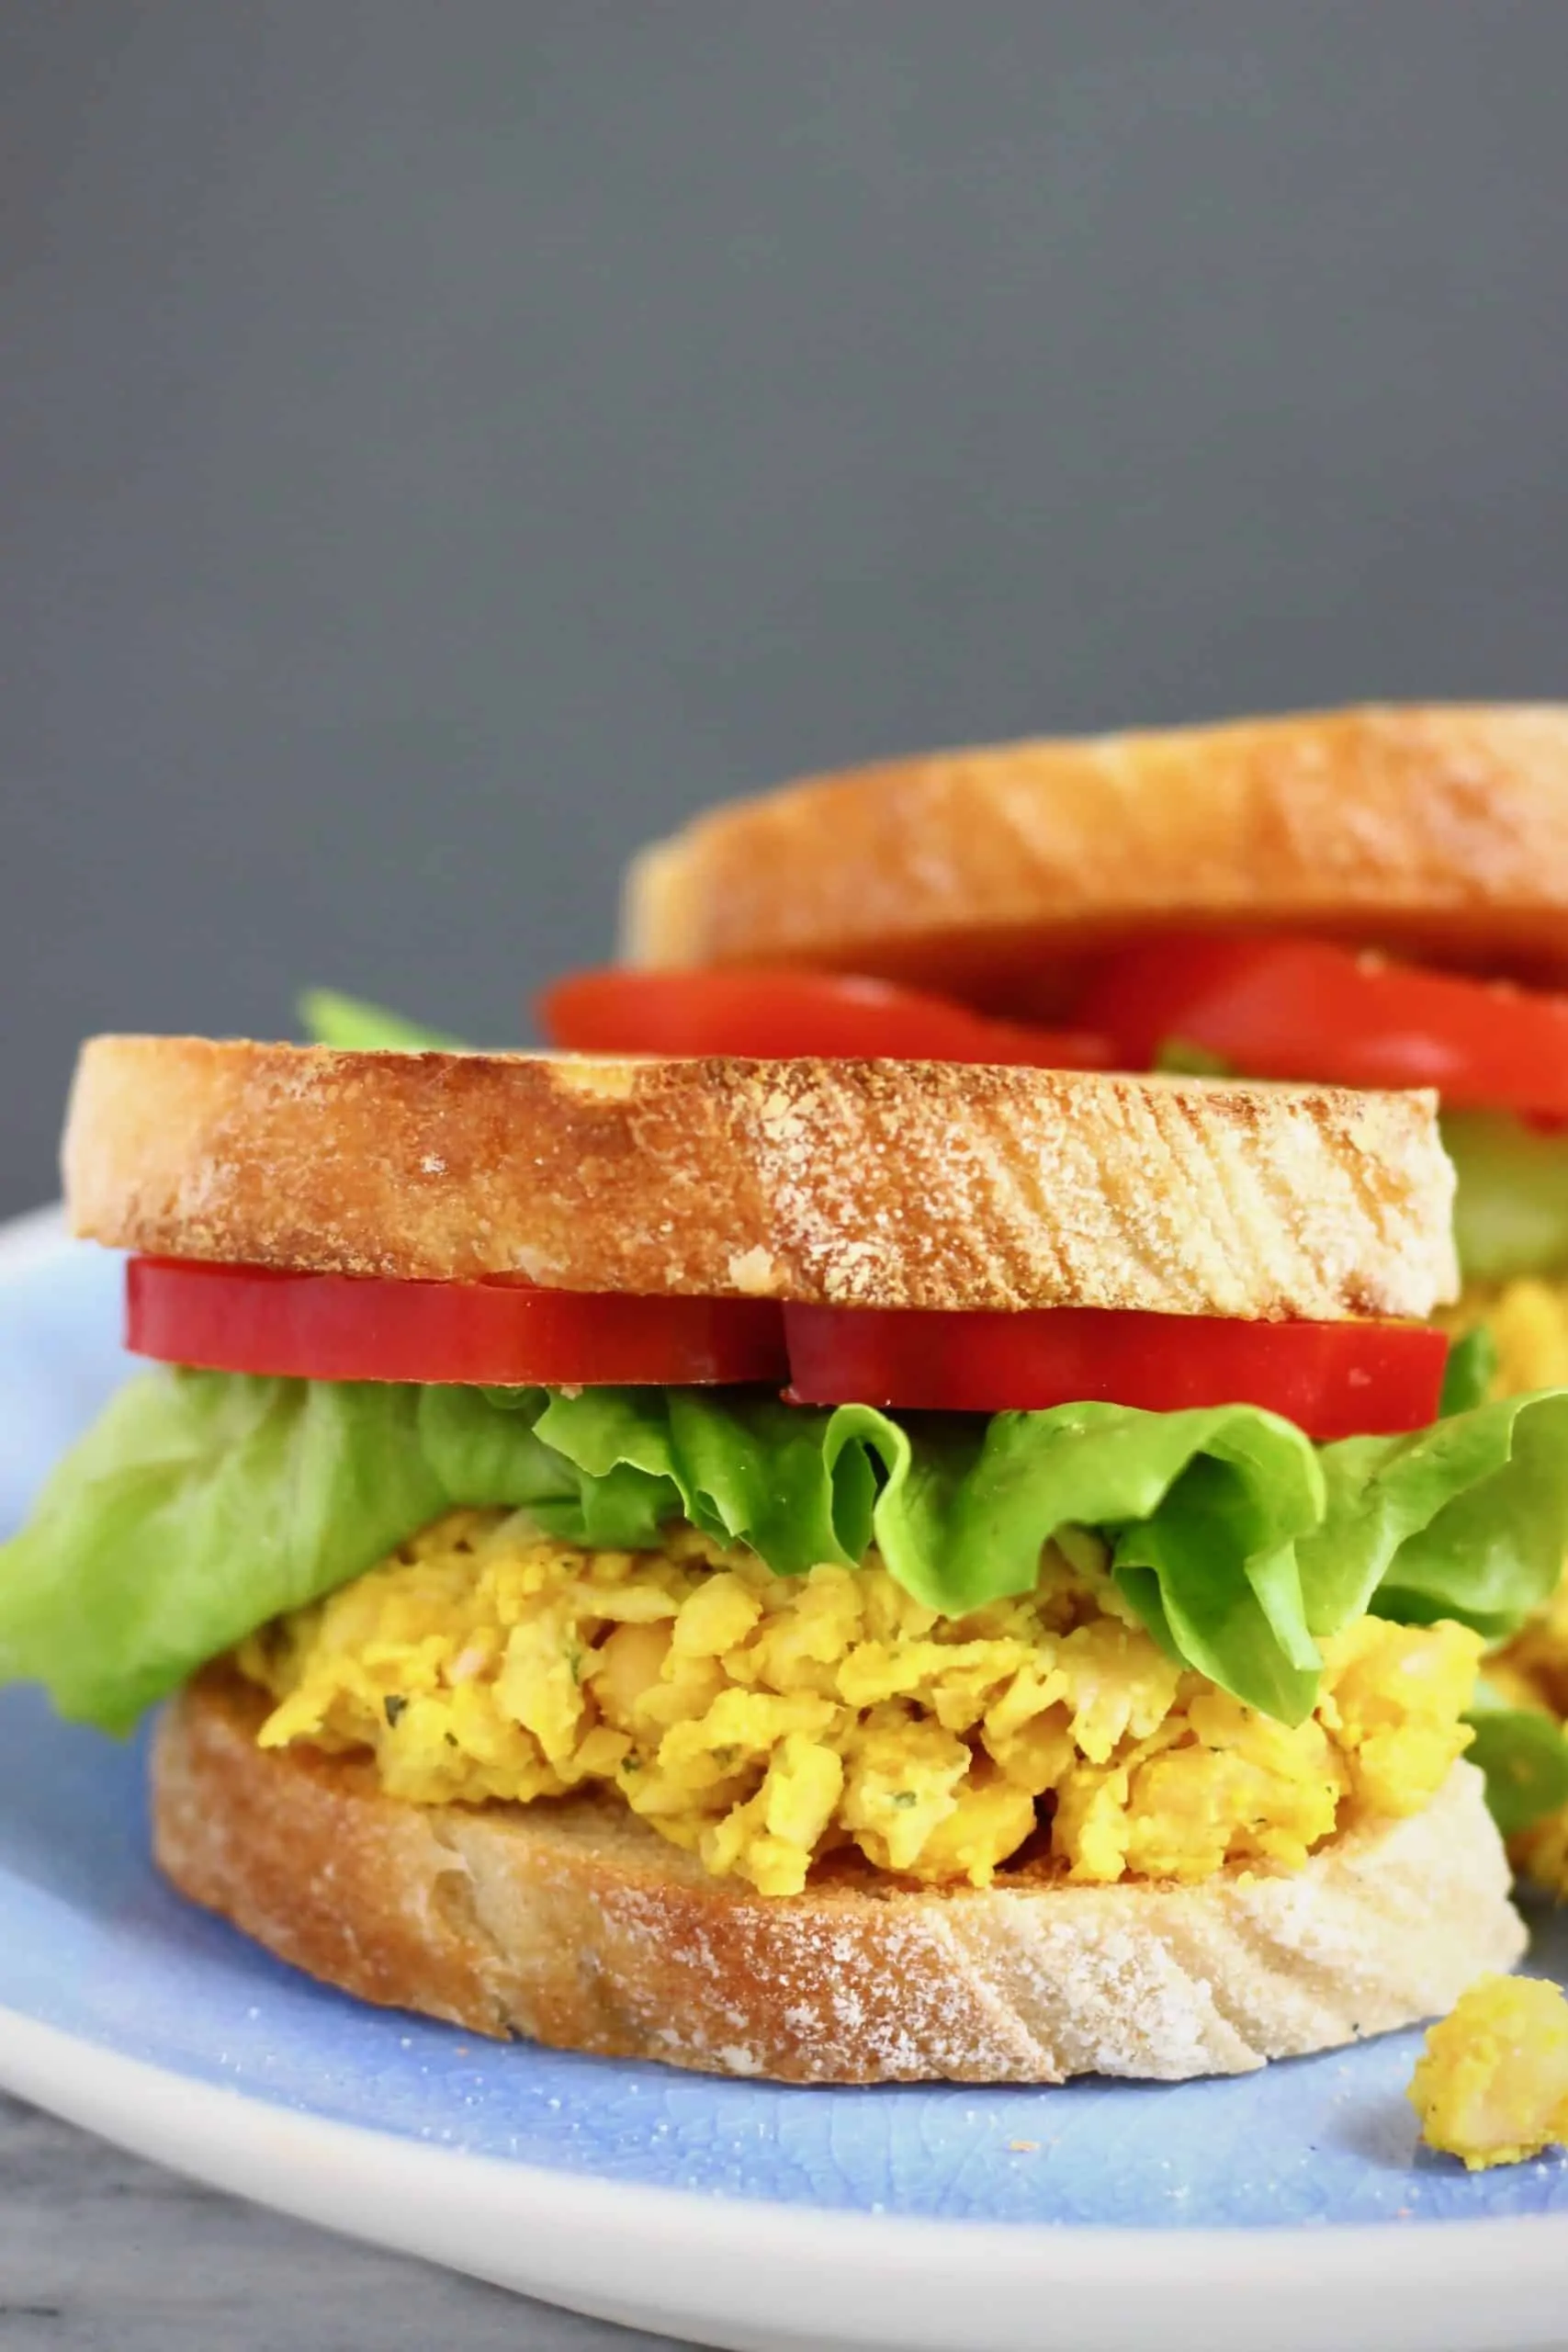 Curried chickpea sandwich with lettuce and red peppers